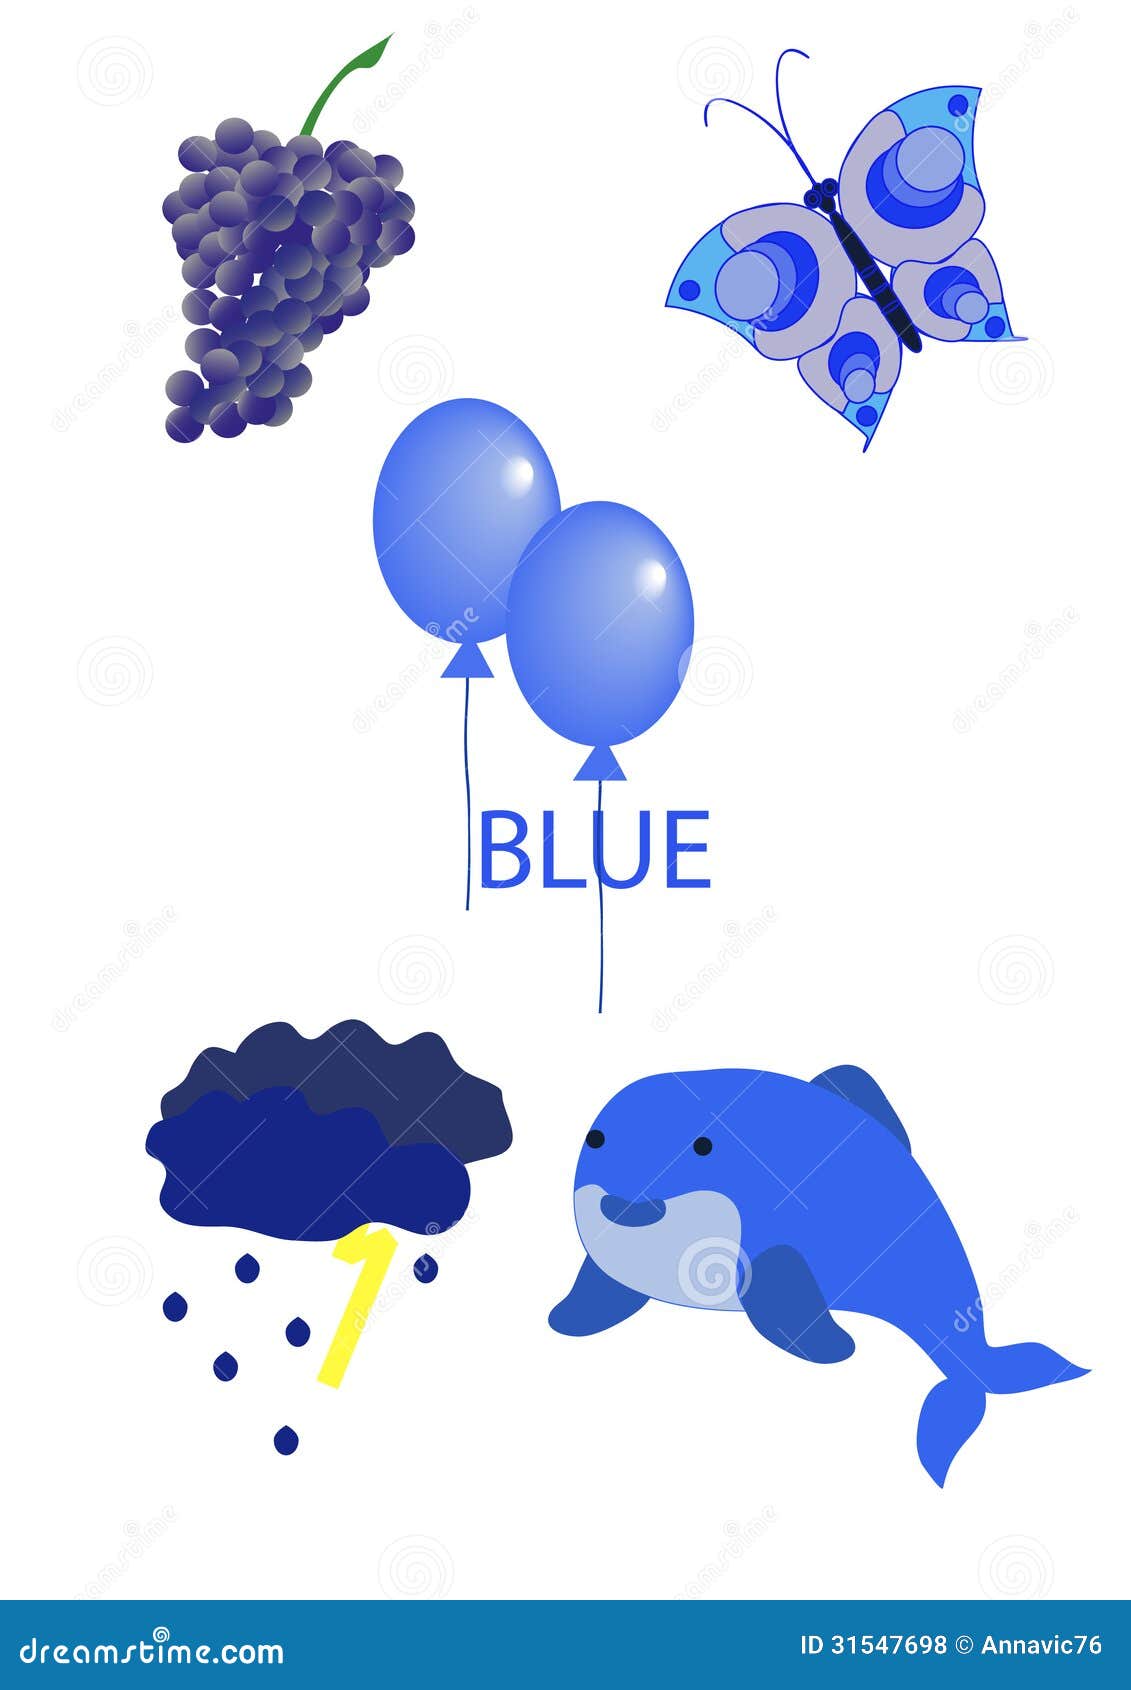 blue objects clipart - photo #36